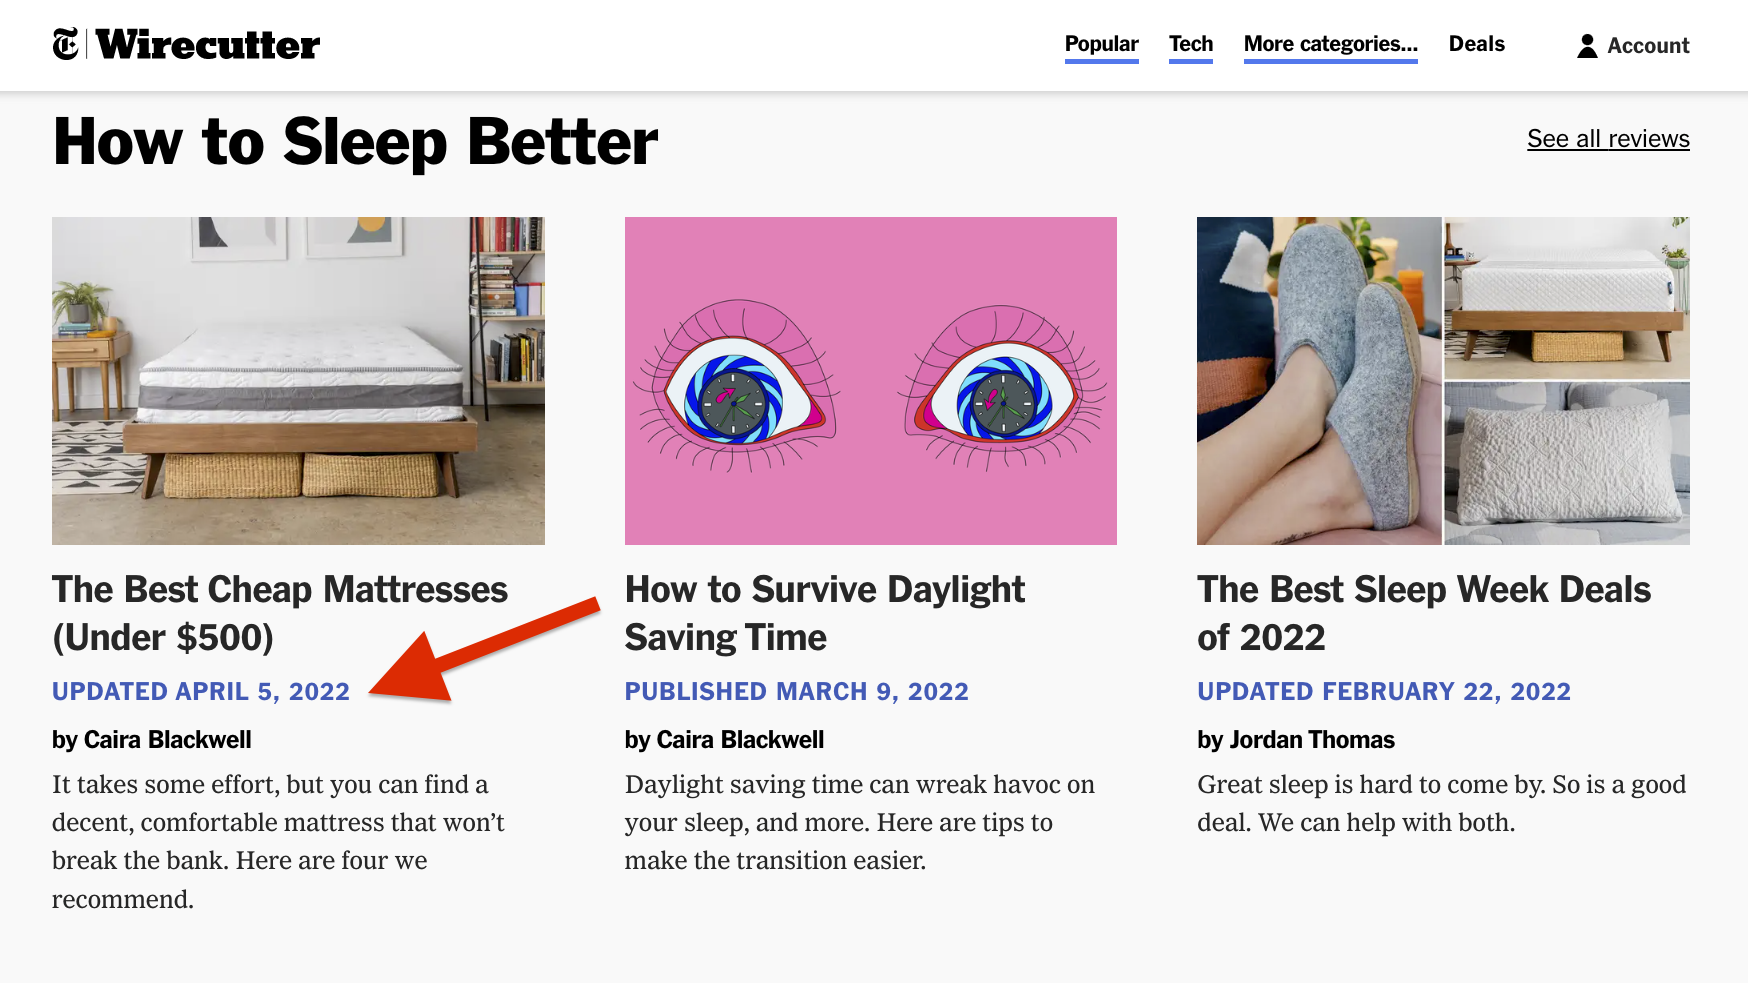 Wirecutter's section of articles on 'How to Sleep Better'